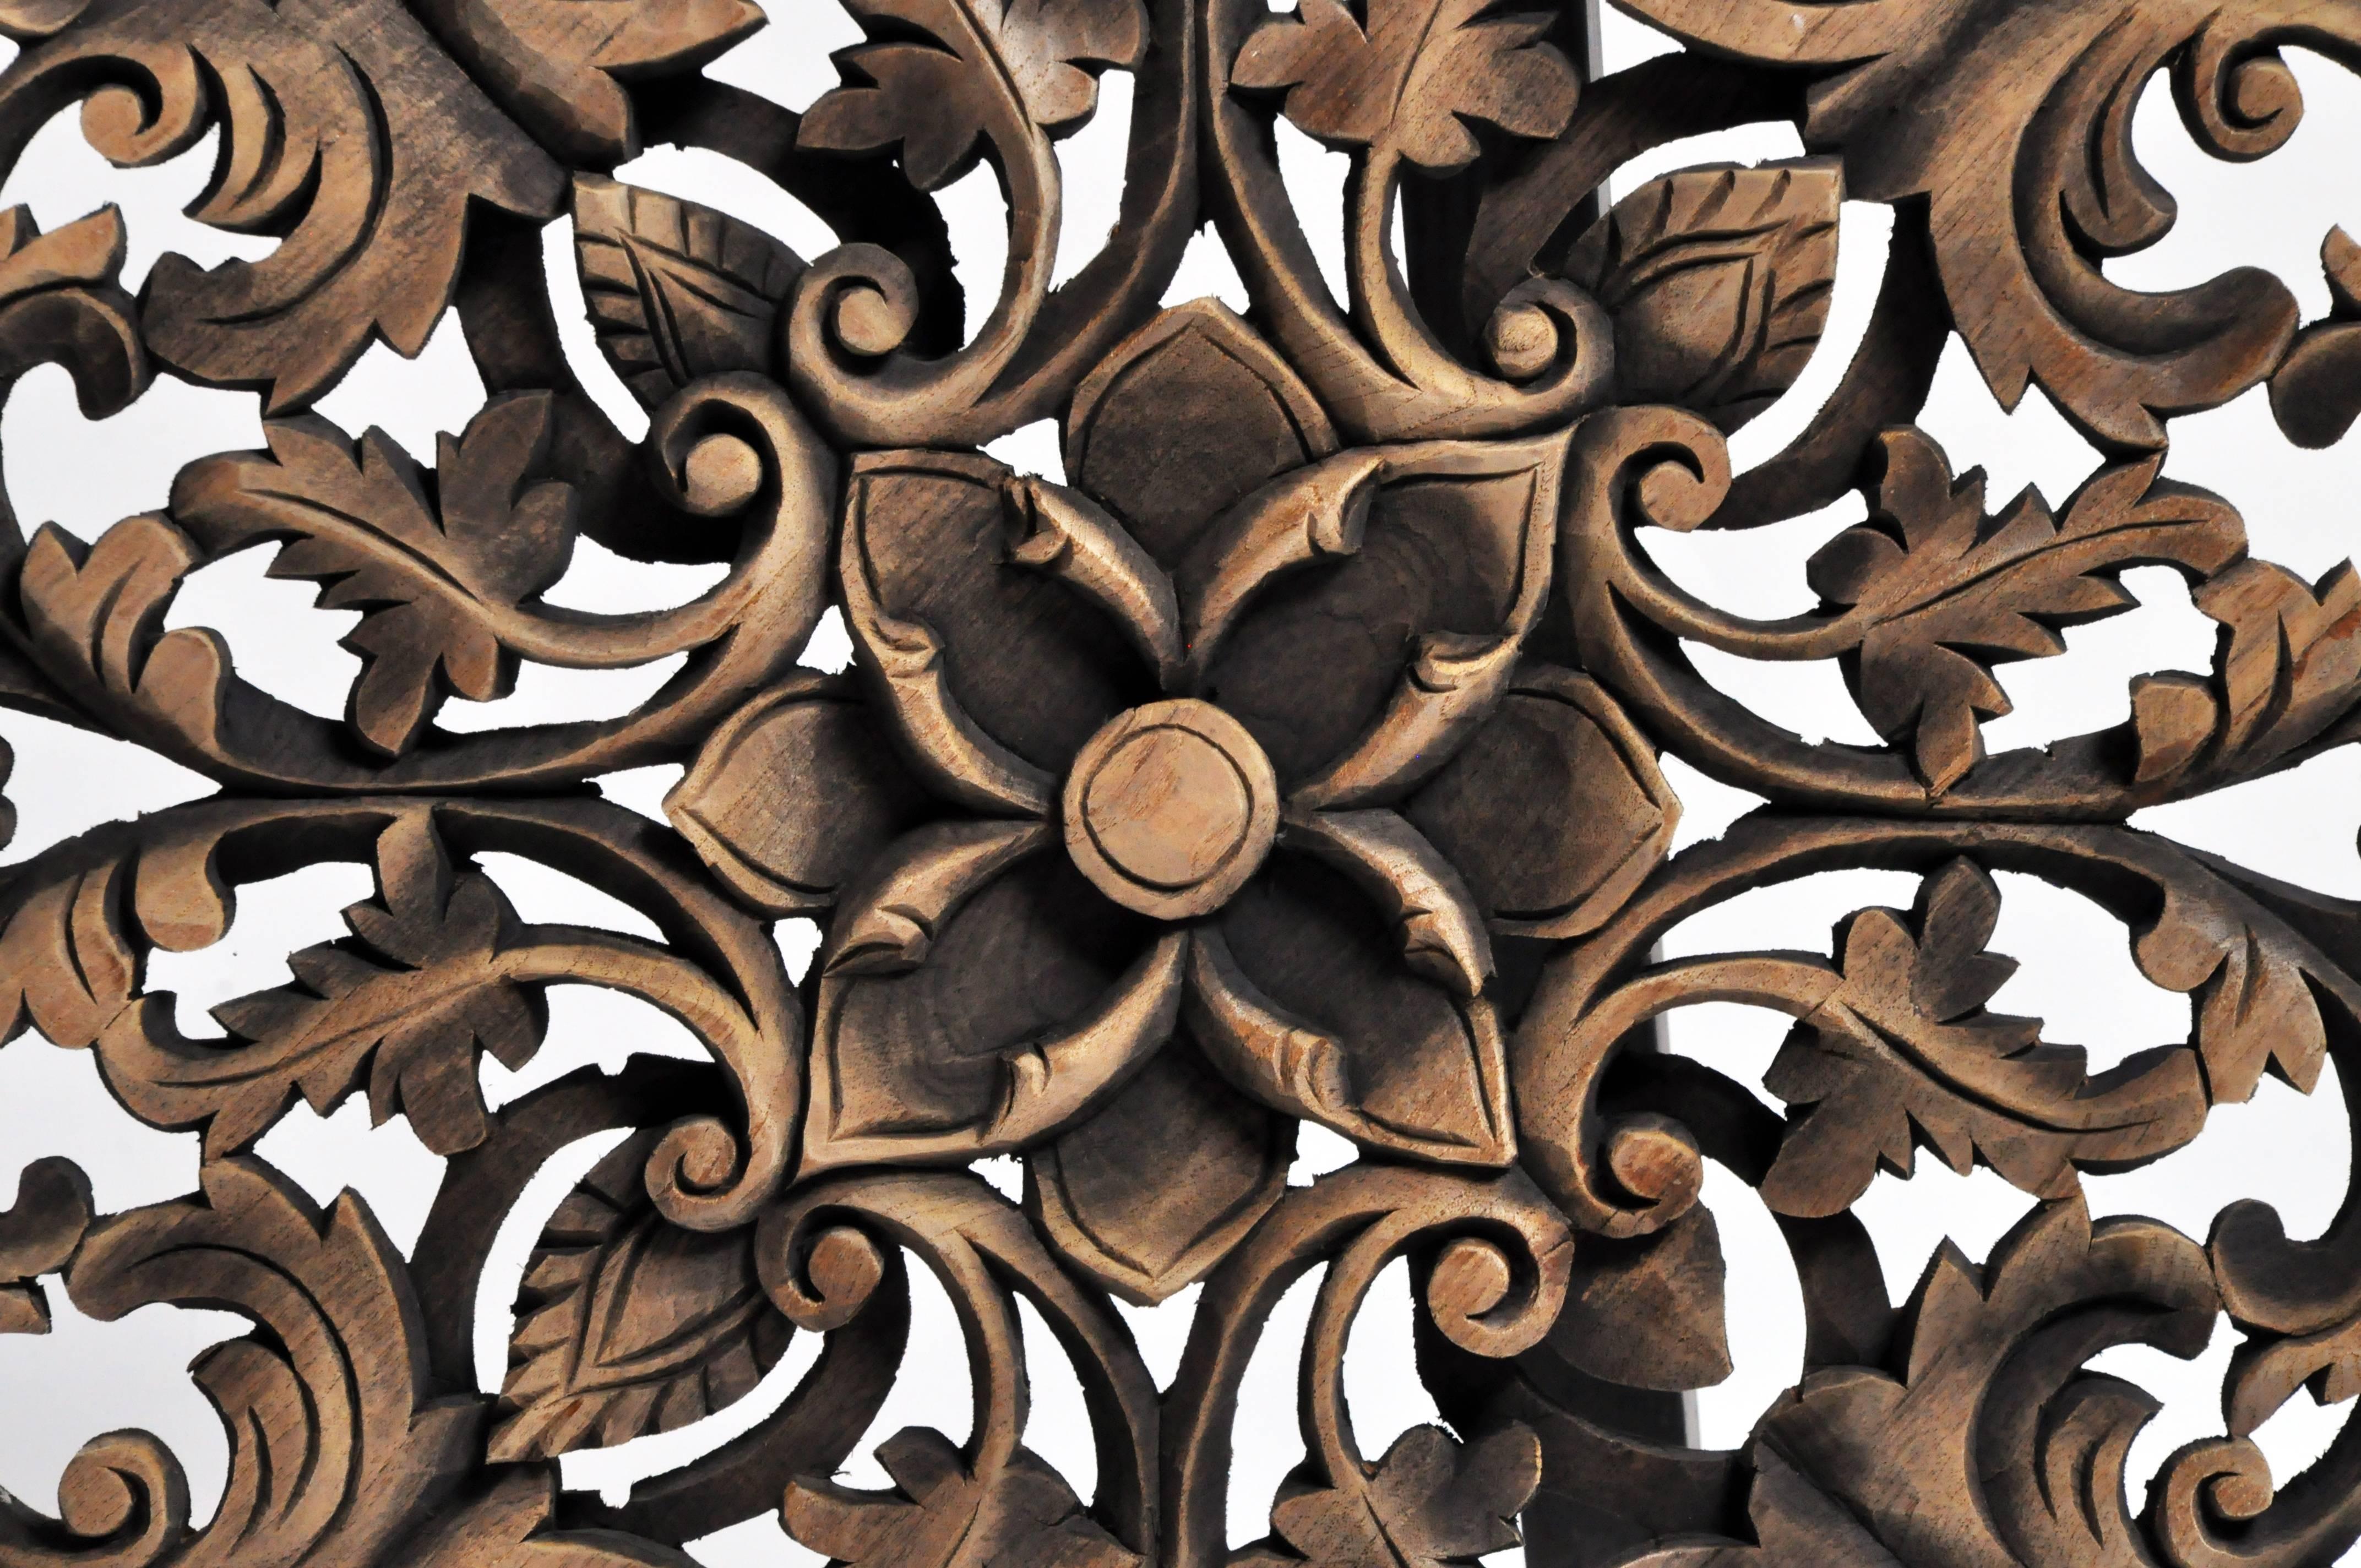 Southeast Asian Round Flower Wood Carving 3